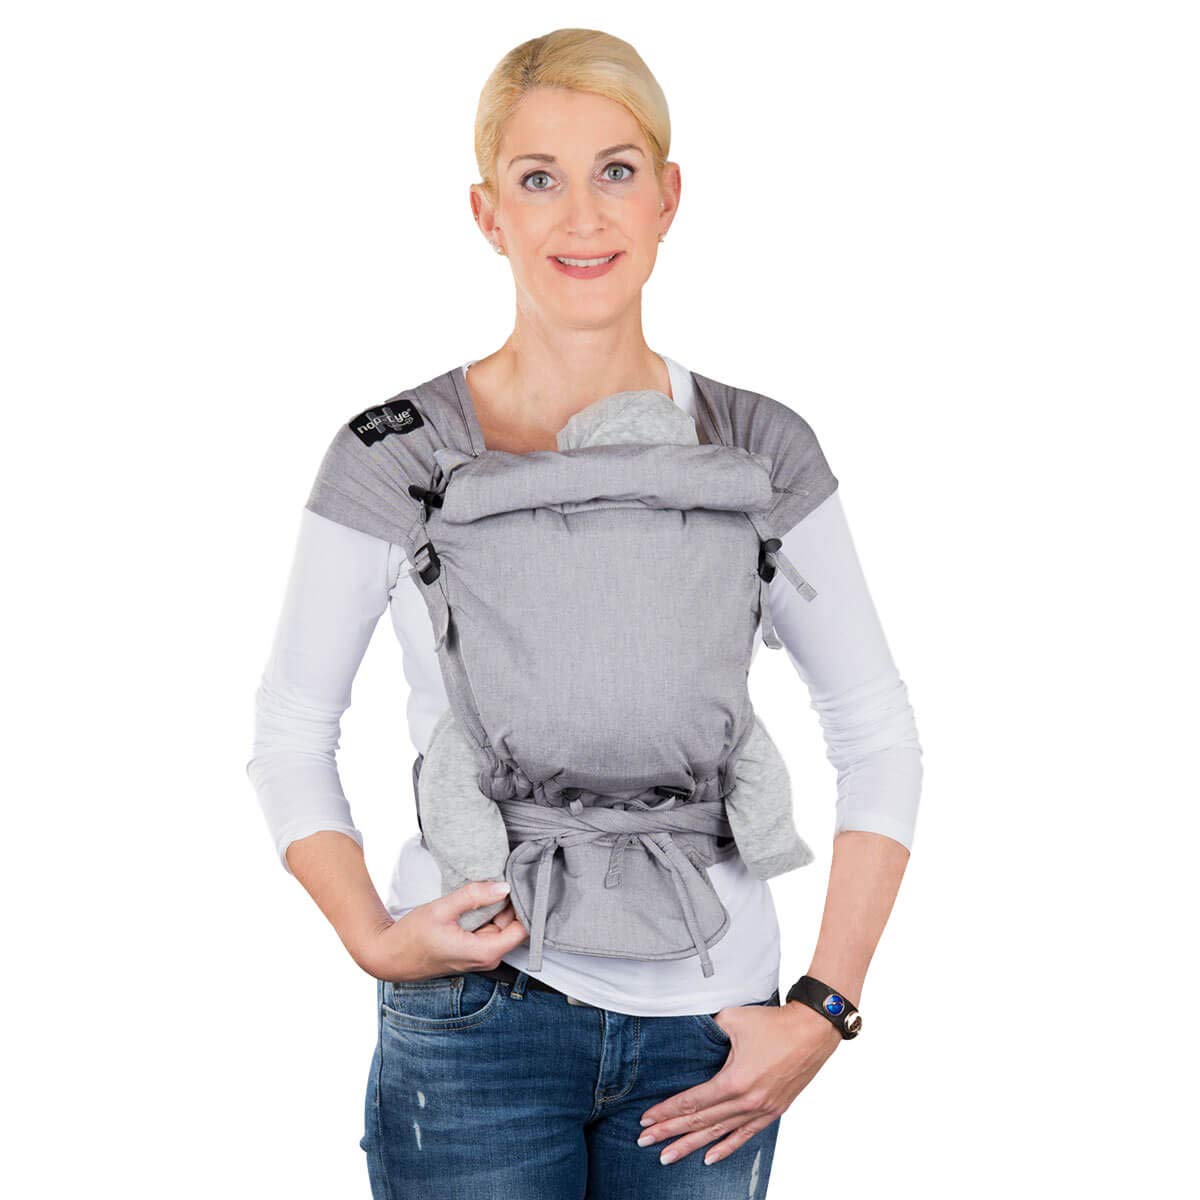 Hoppediz Hop-tye Buckle - Baby Carrier I Halfbuckle I Mei Tai I Belly Carrier & Back Carrier I Design Mottled Grey, One Size for Hip Circumference up to 160 cm